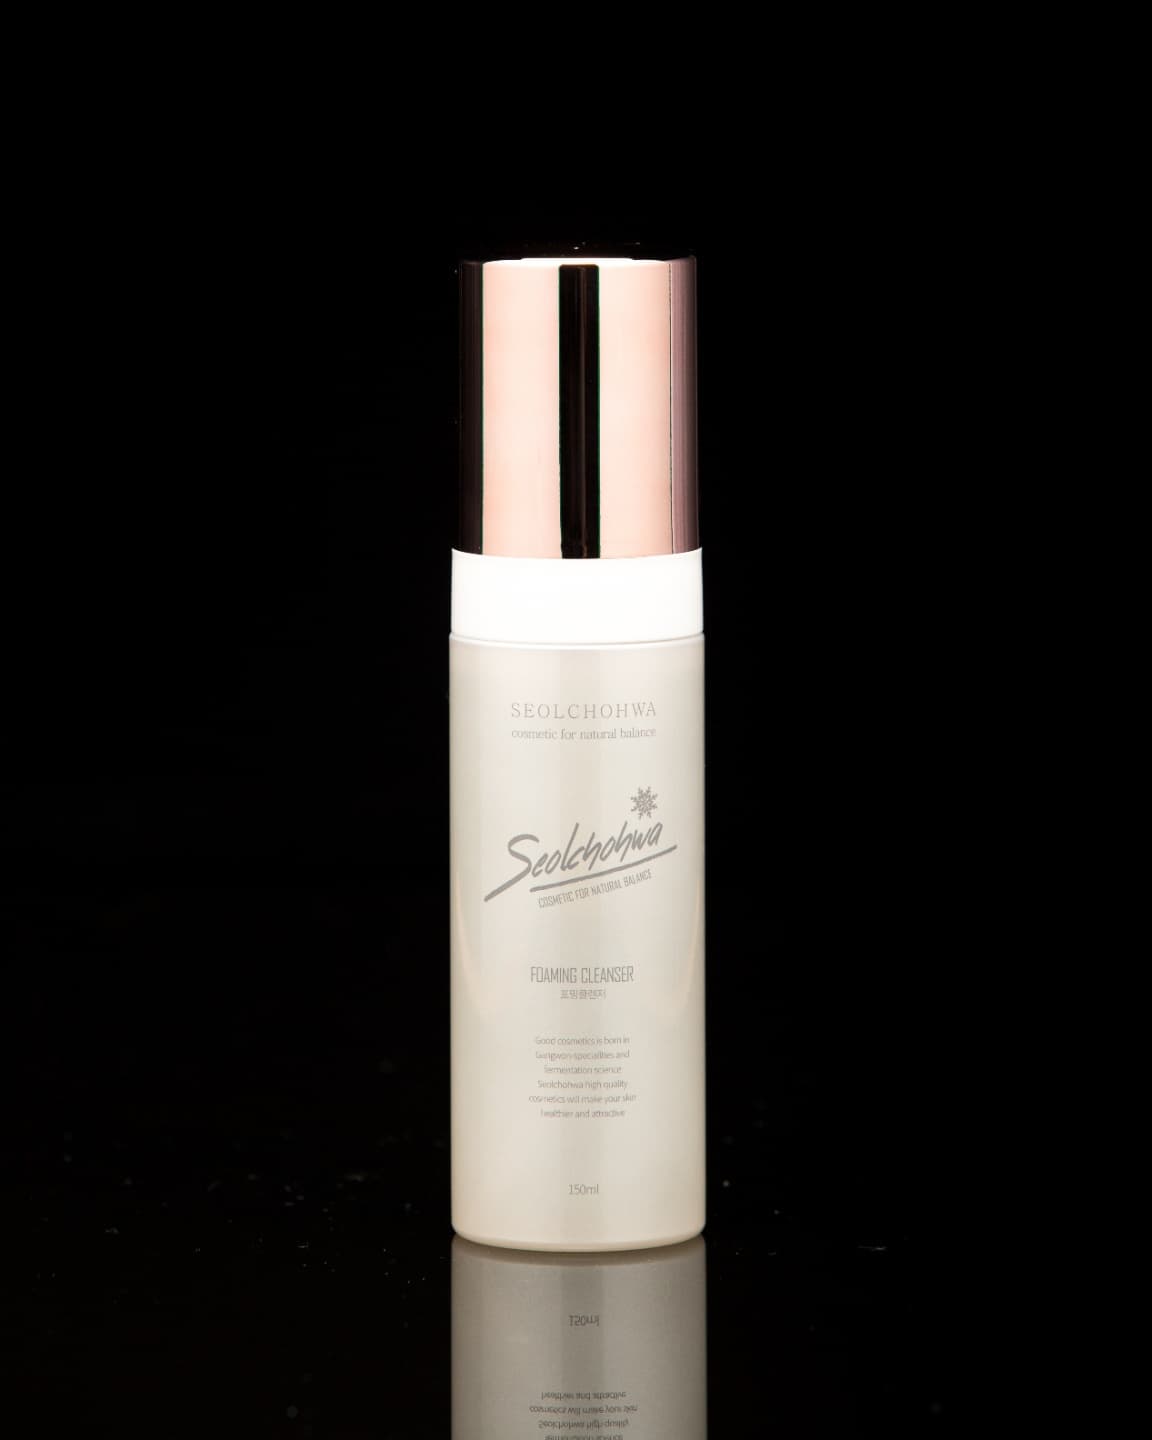 Seolchohwa Foaming Cleanser _ Cleanse_ Makeup removal